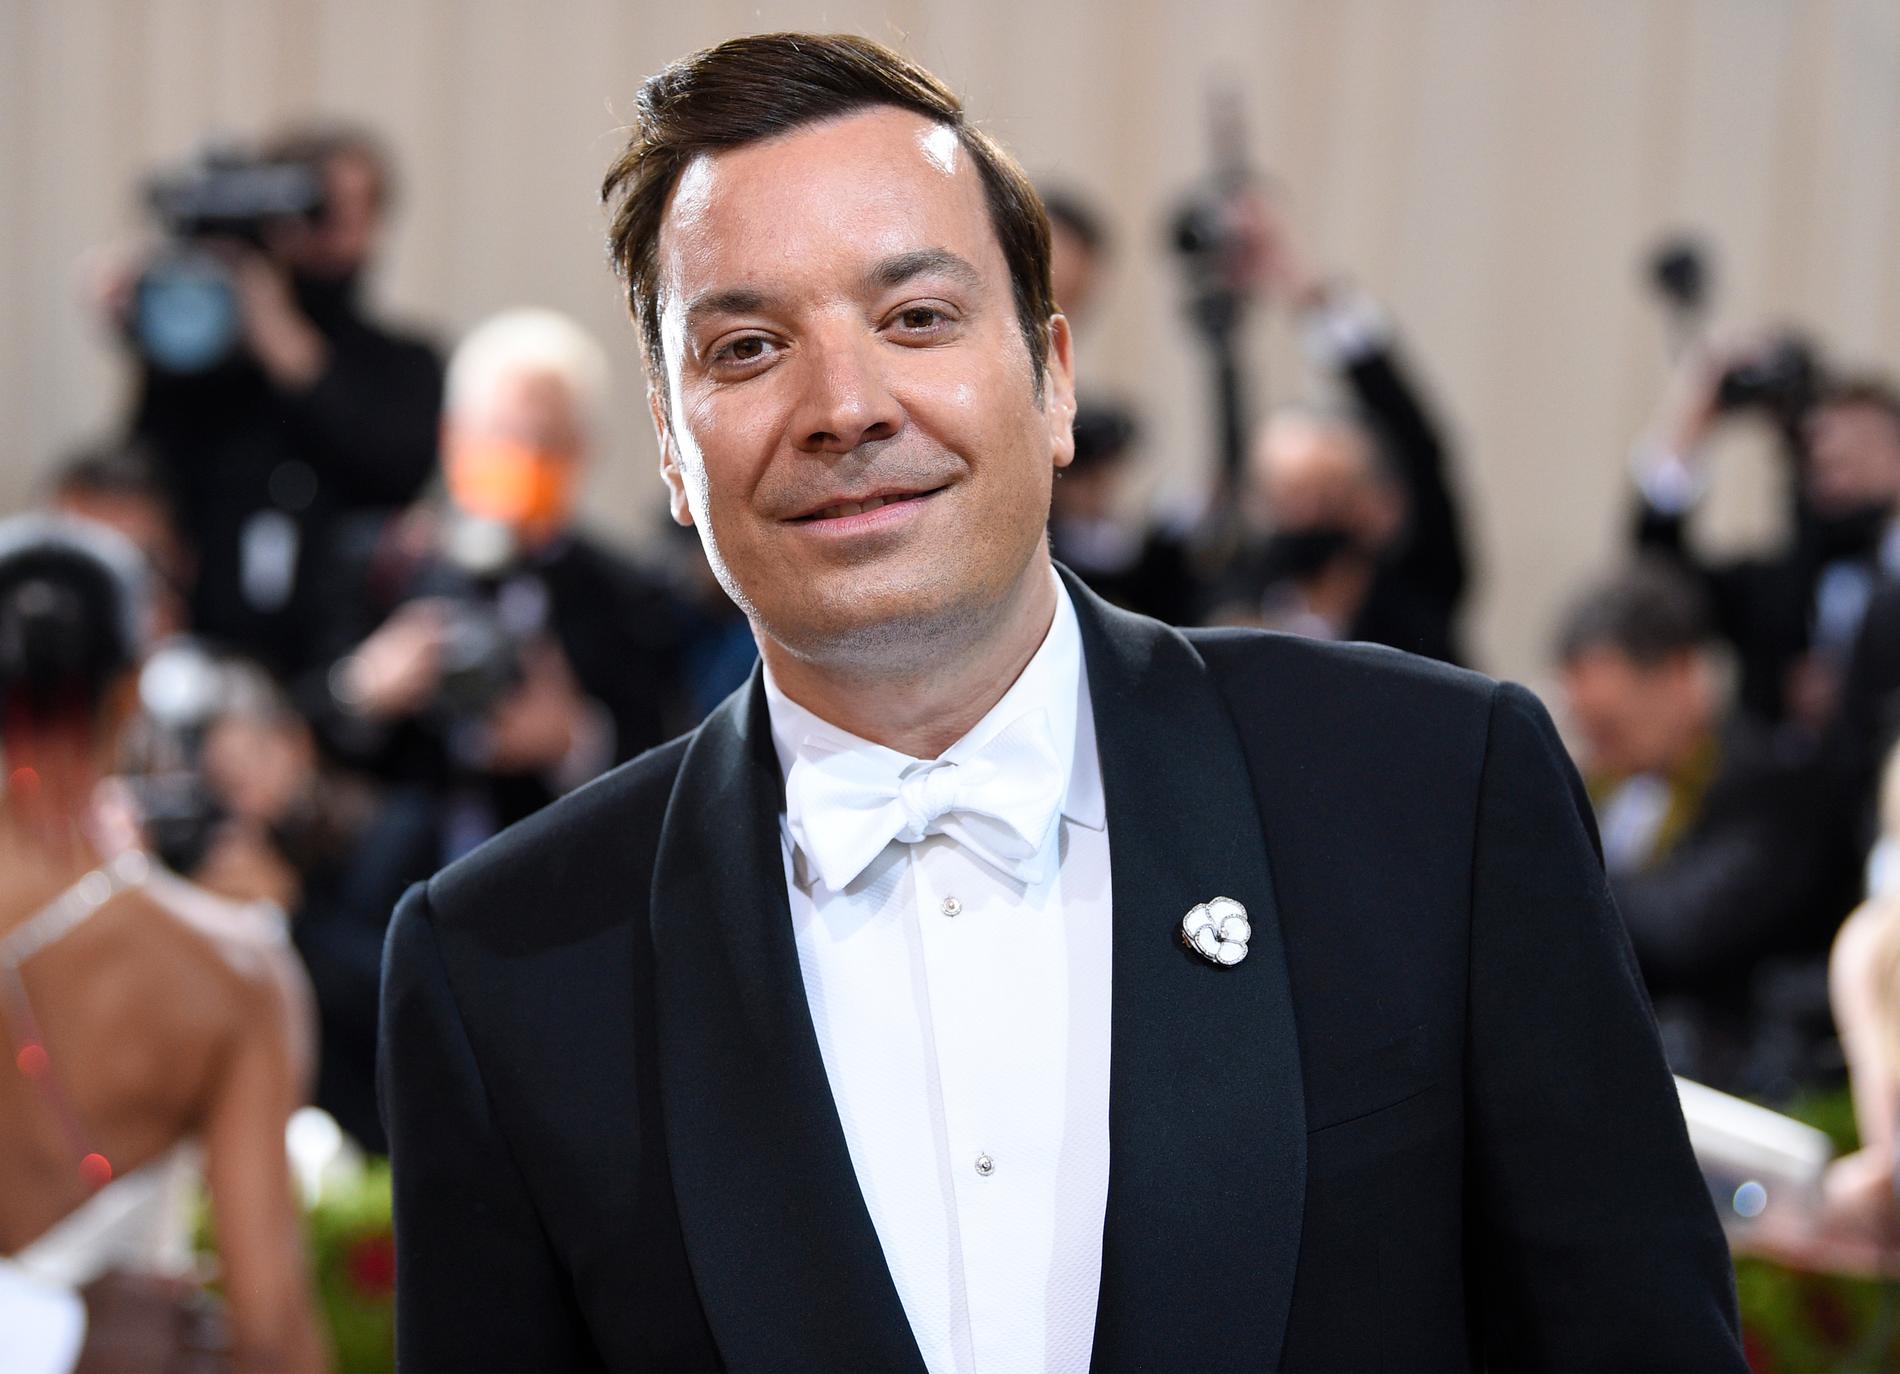 Talk Show Host Jimmy Fallon Apologizes for Creating a Toxic Work Environment